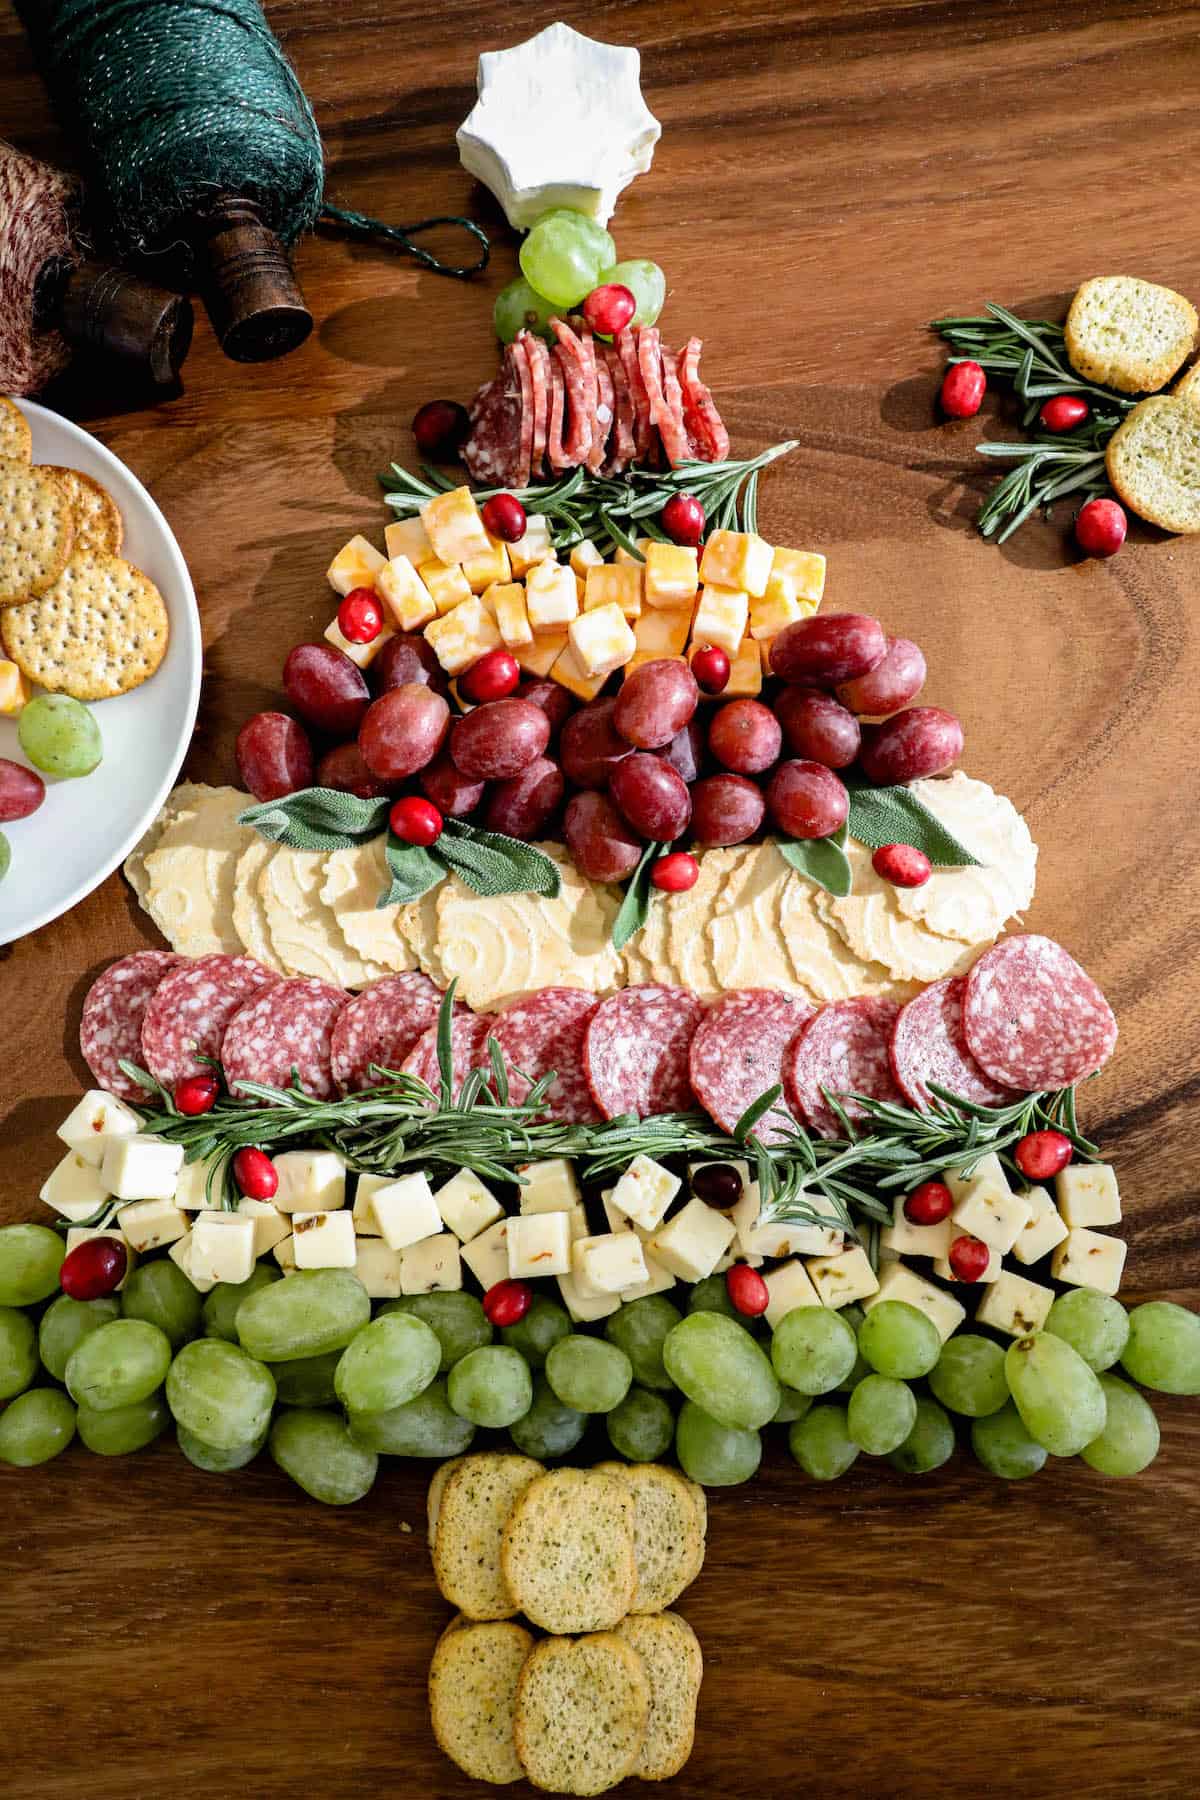 A festive Christmas cheese board adorned with a delightful assortment of crackers, grapes, and a cheese Christmas tree centerpiece.